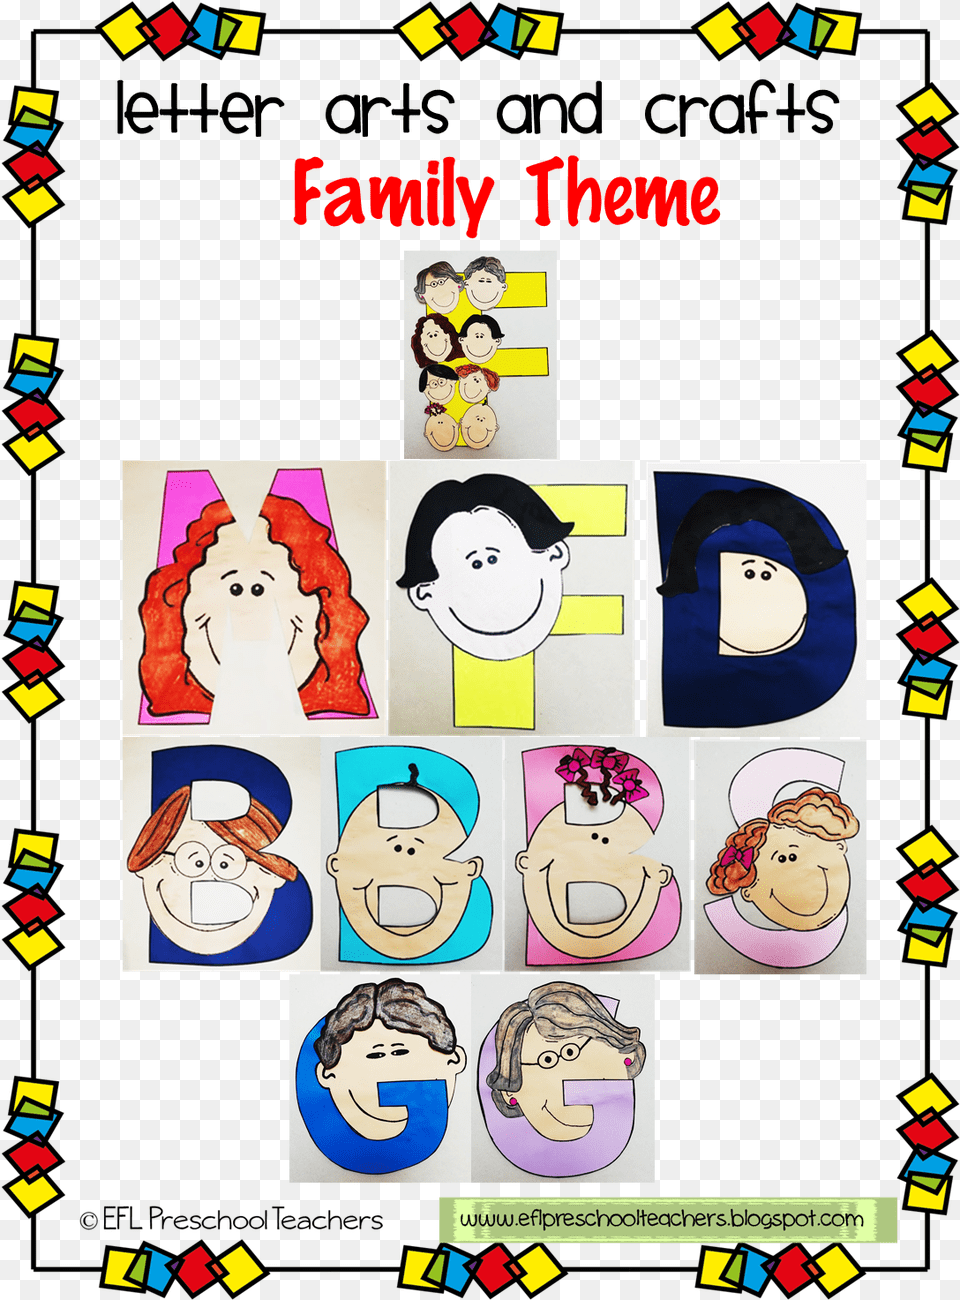 And There Is The Letter Arts And Crafts For The Family Arts And Crafts About Family, Book, Comics, Publication, Baby Png Image